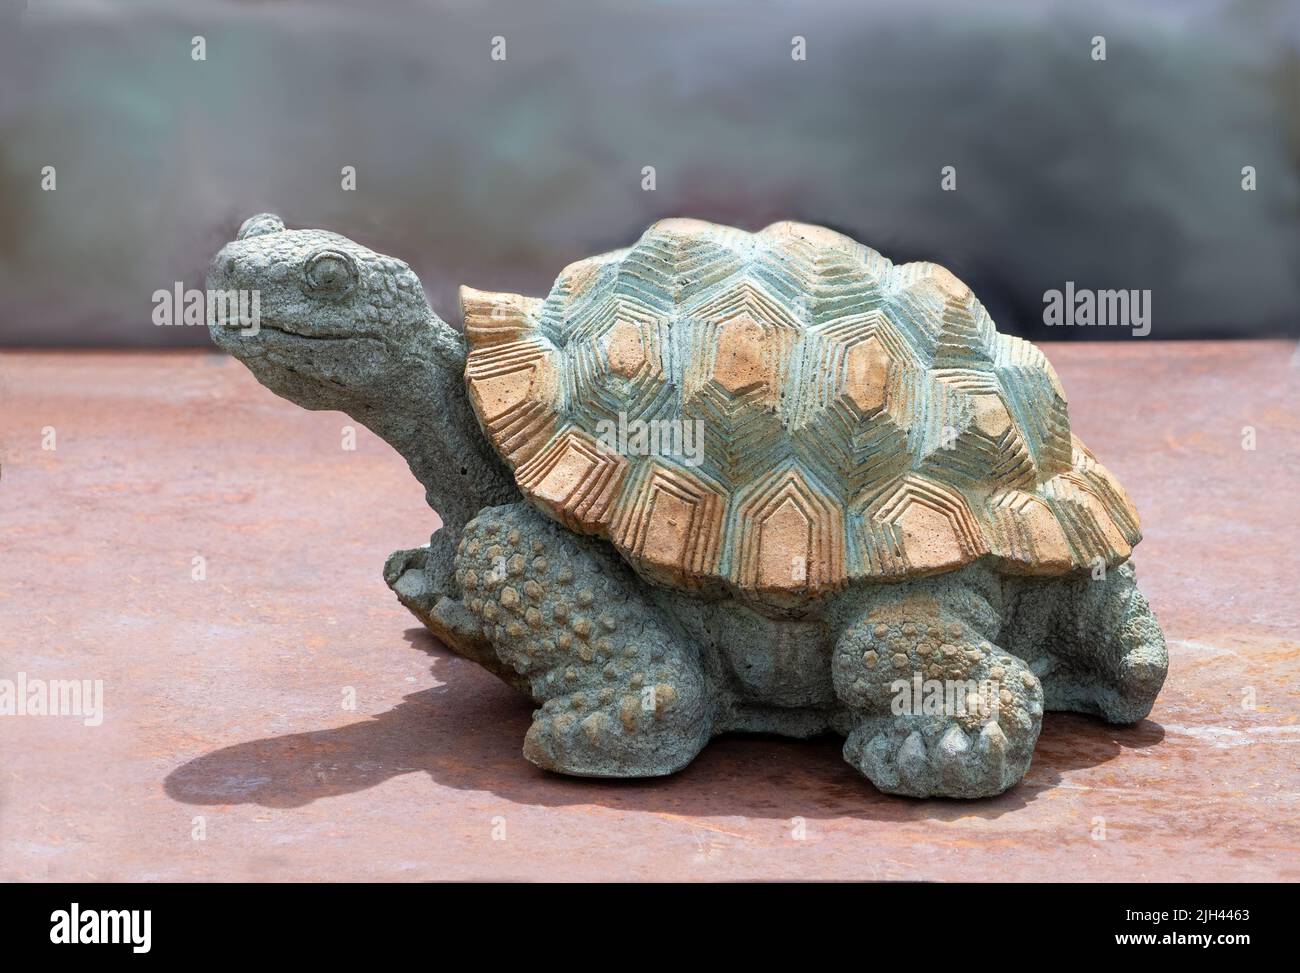 stone turtle sculpture looks like he's on the move, but guards the garden instead in happy silence Stock Photo